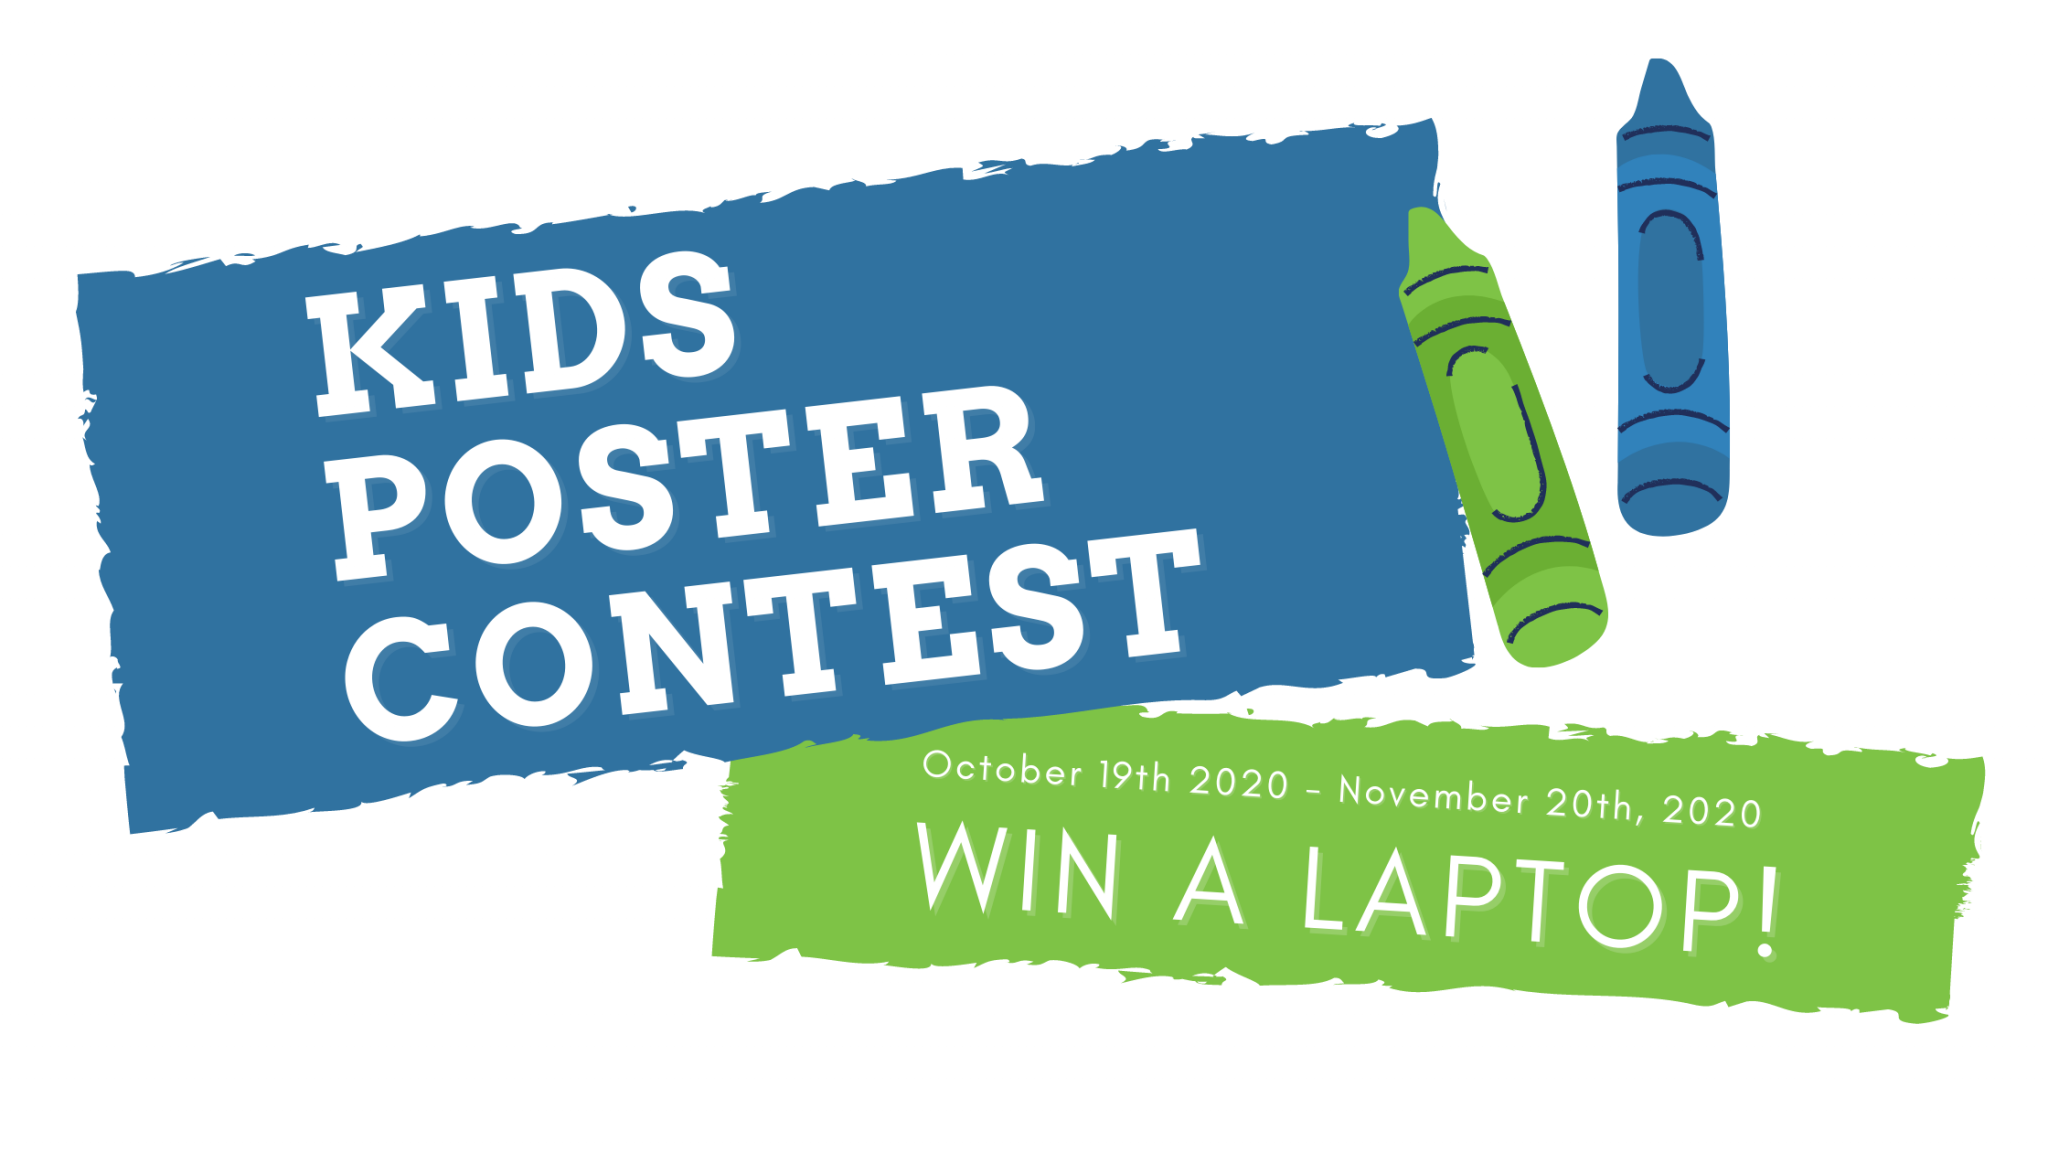 Kids Poster Contest